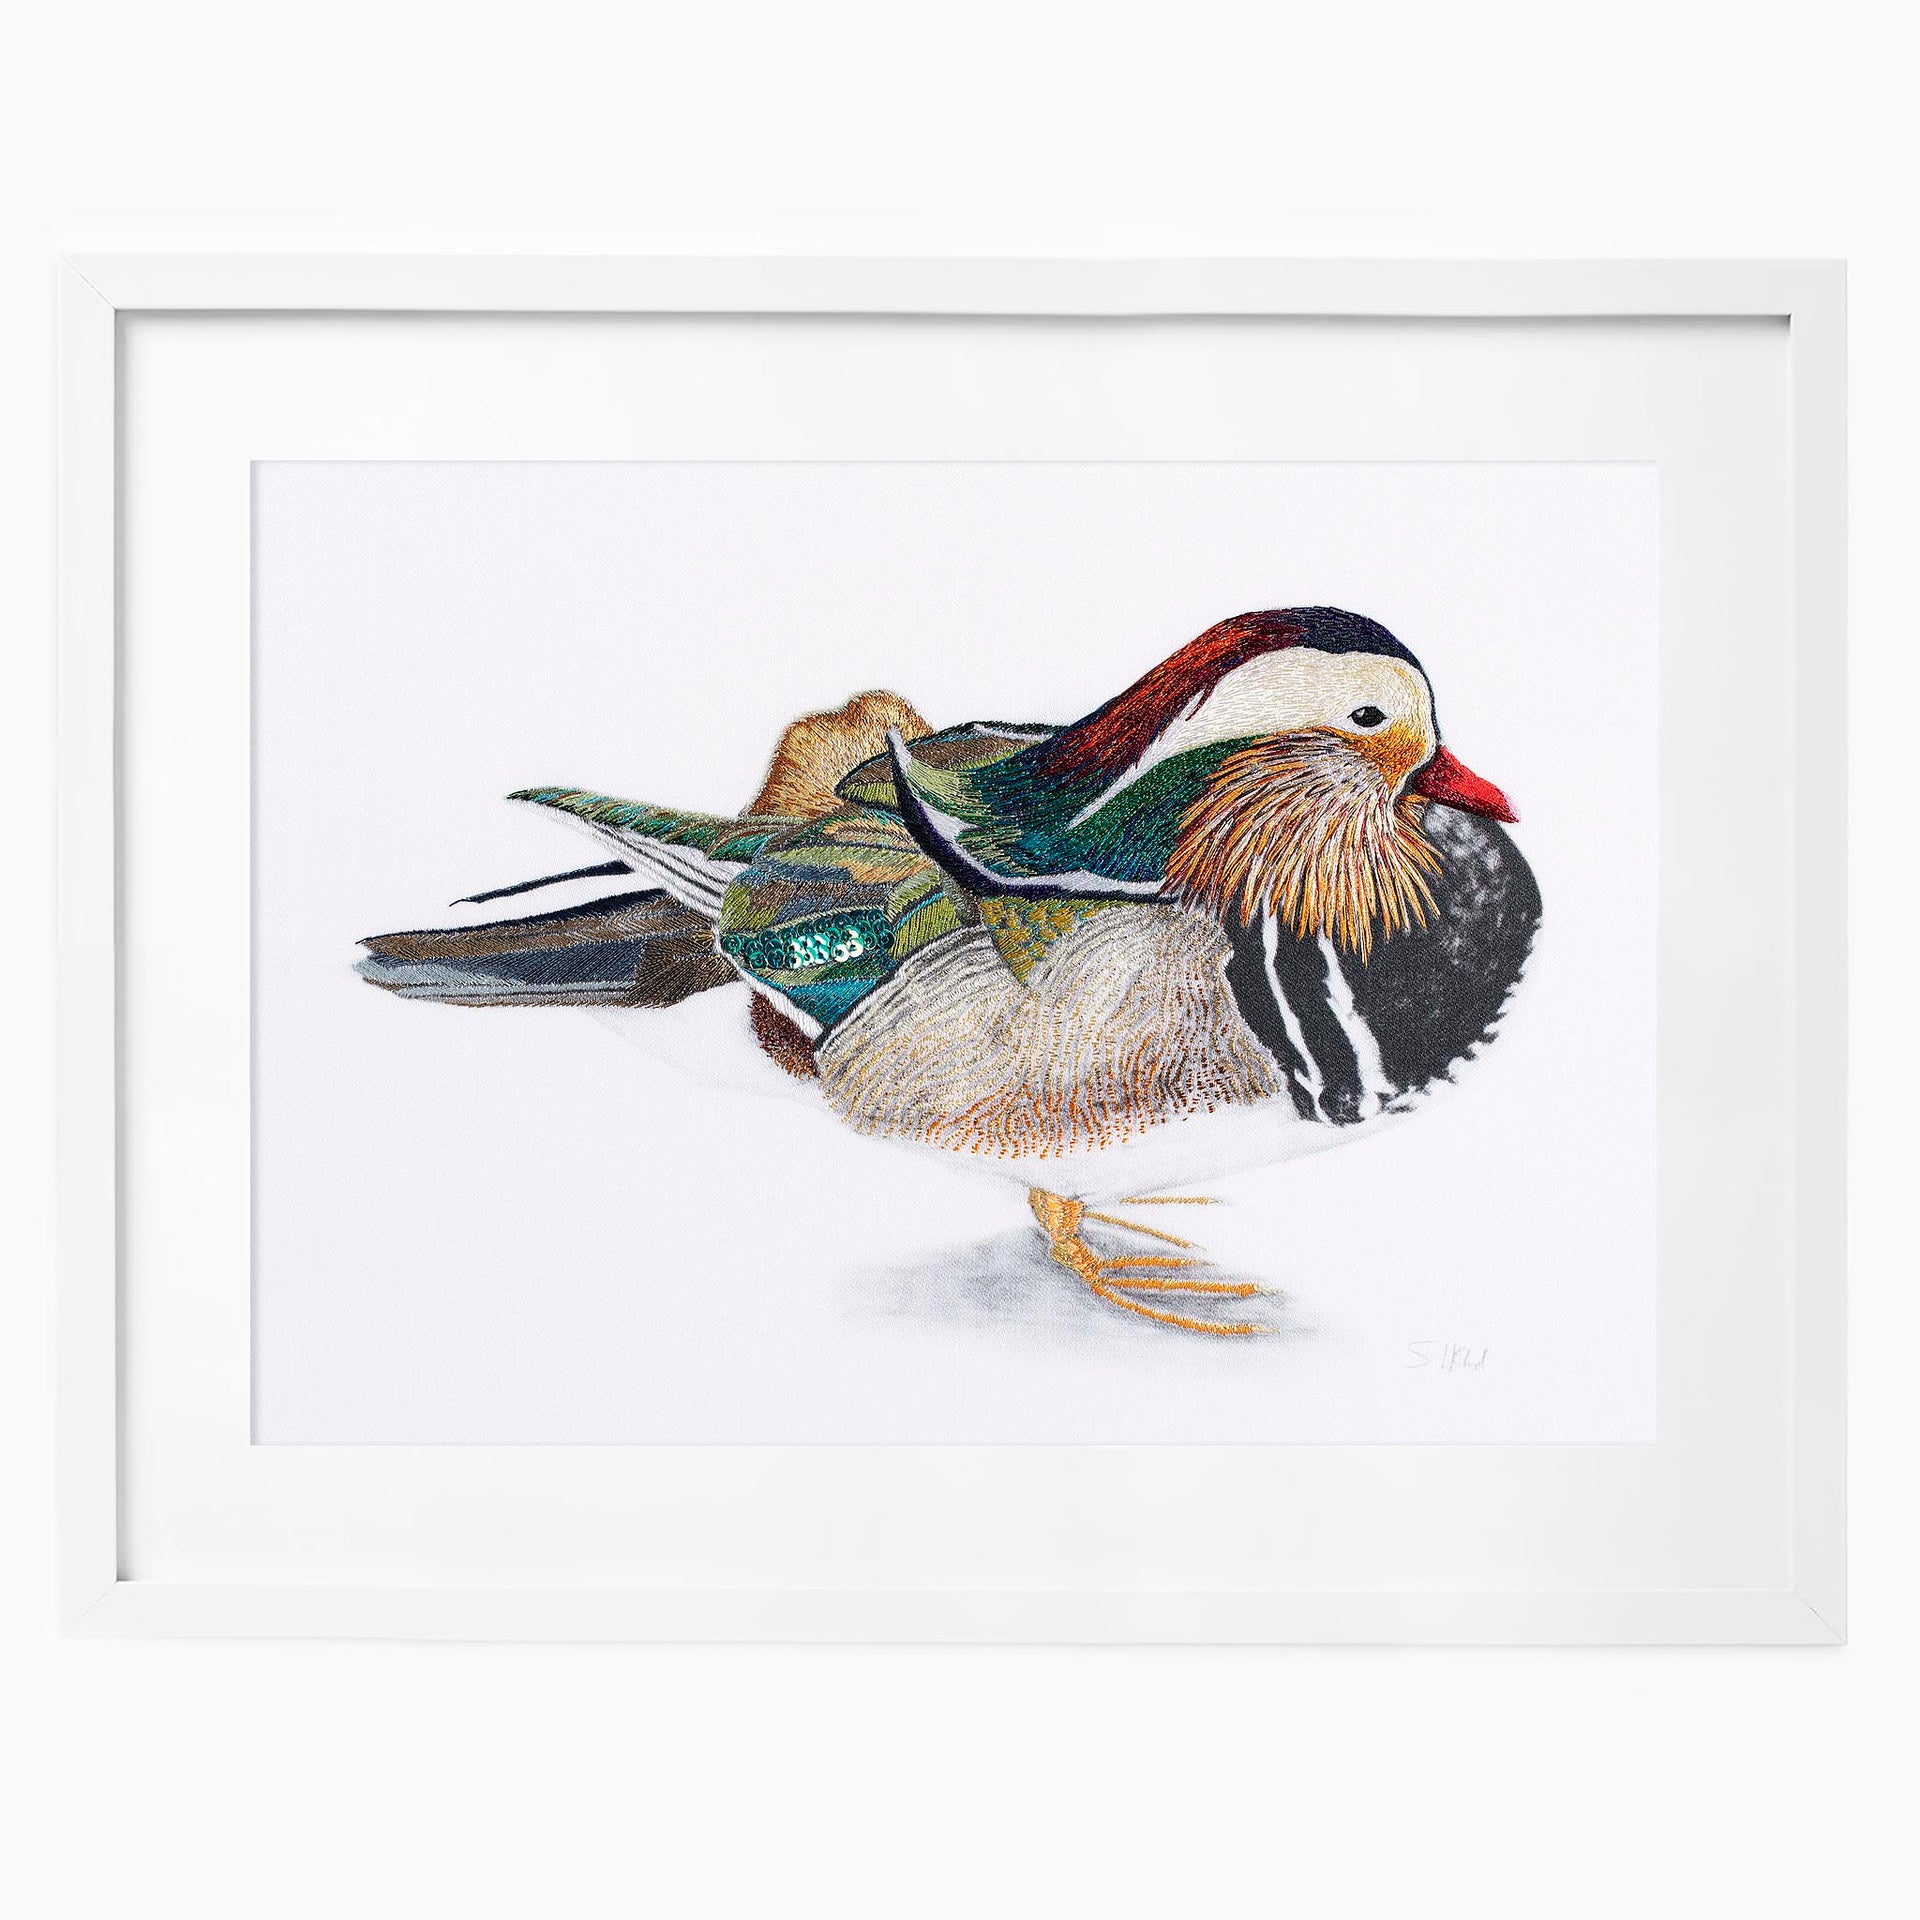 Mandarin duck hand embroidered limited edition print in white frame